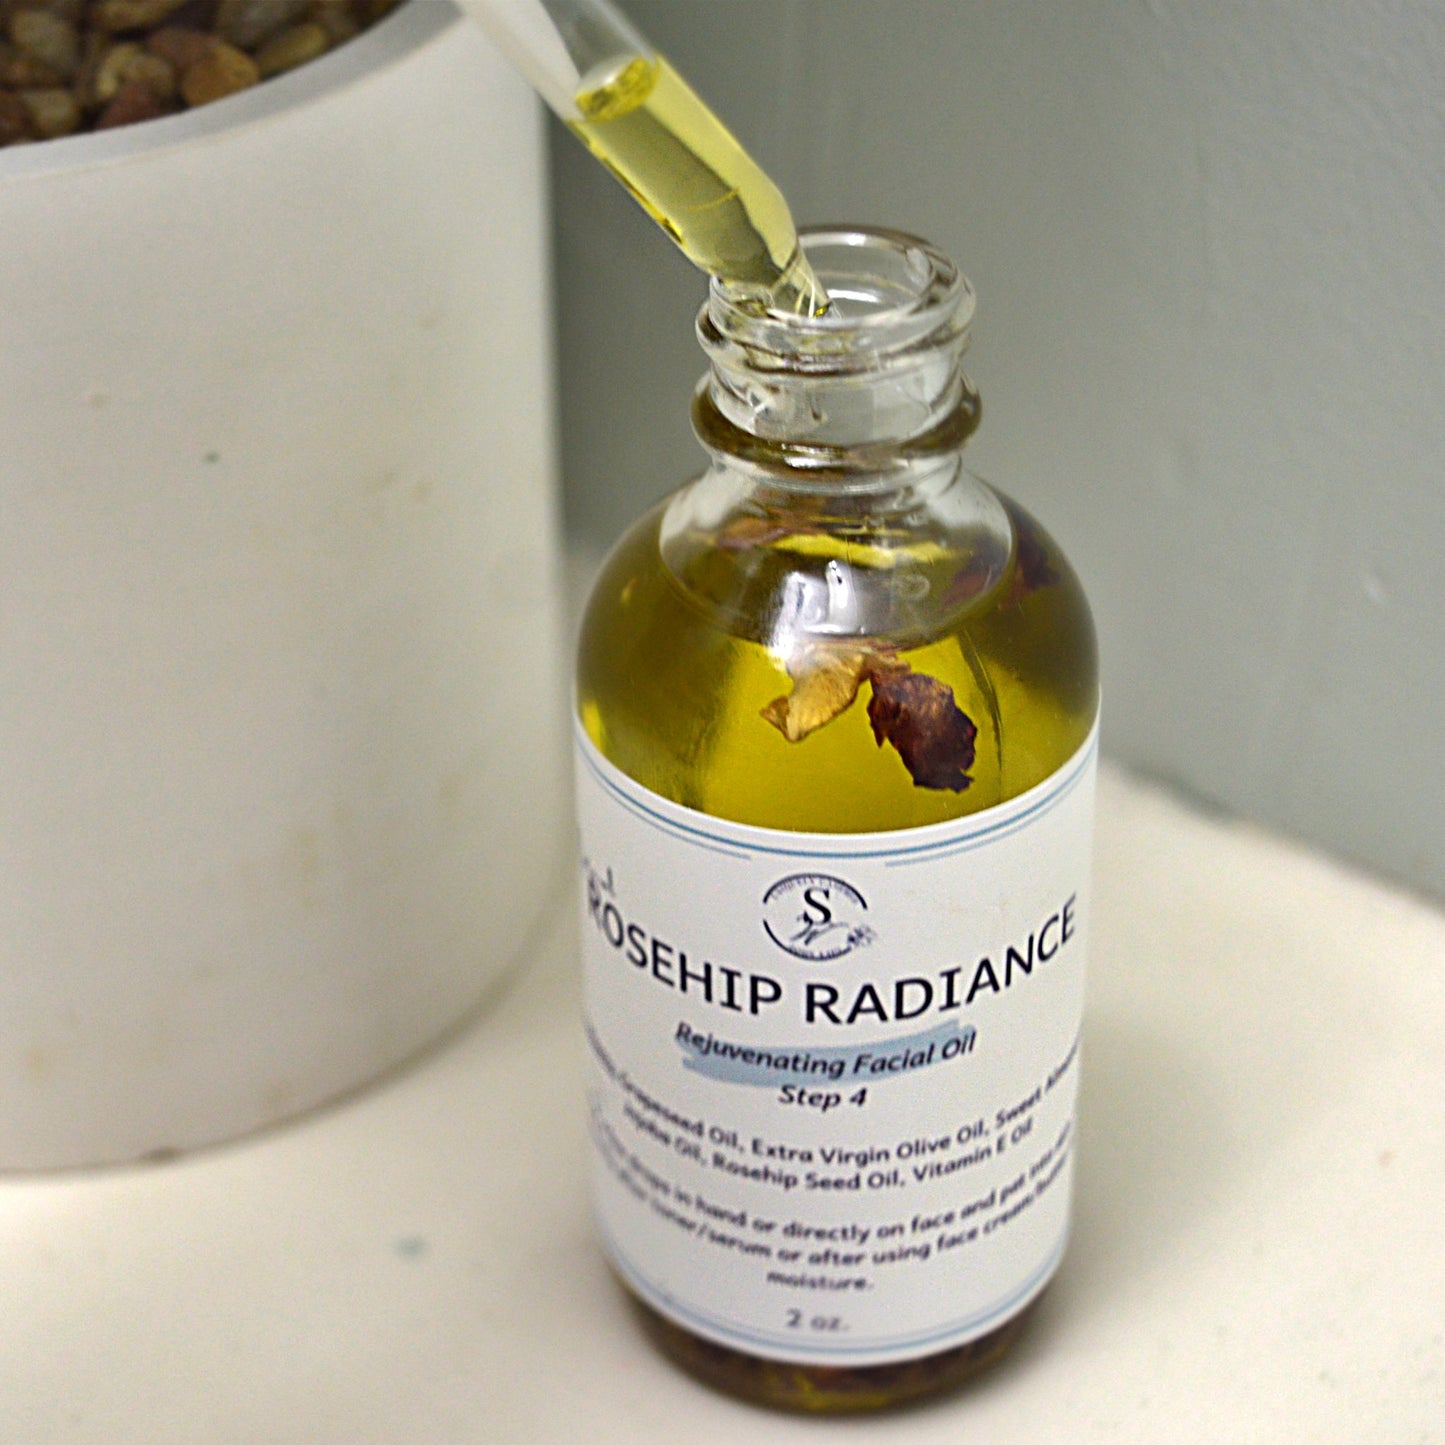 Rosehip Radiance Skin Oil - Step 4 Oils- SnW Gifts